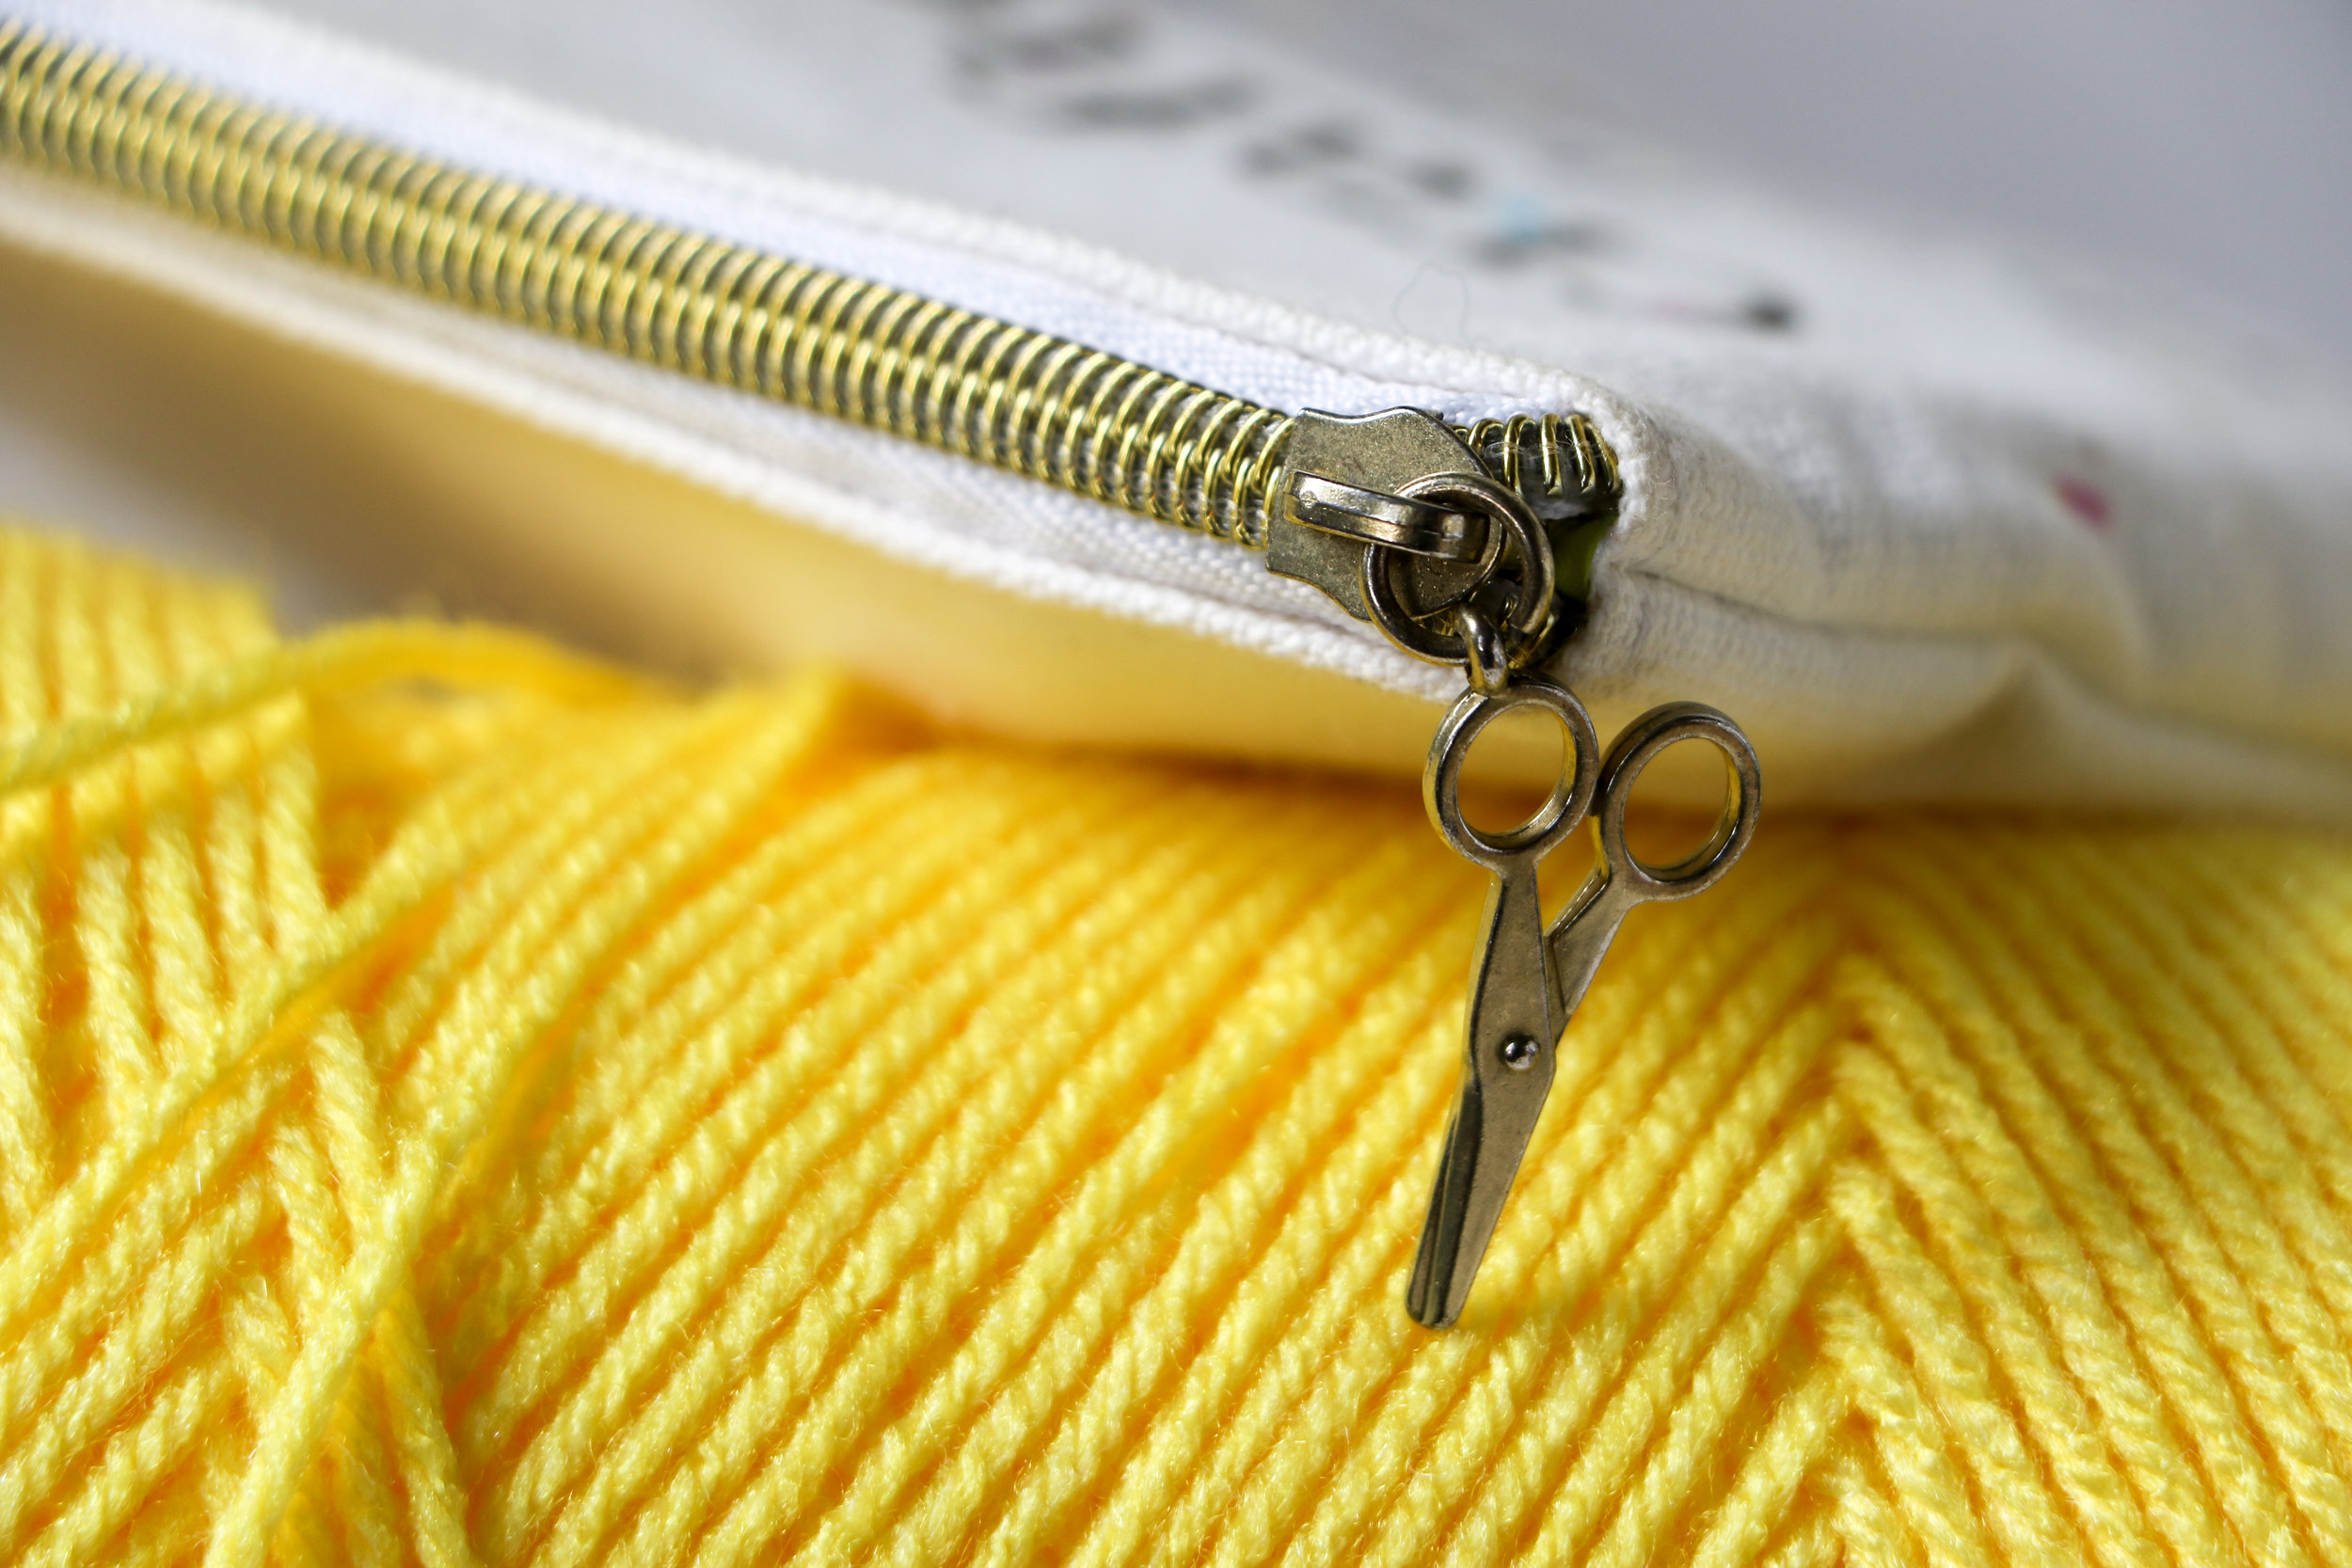 Alt text: a closeup of a brass zipper with a charm that looks like a pair of scissors hands off a canvas bag and leans against a bright yellow ball of yarn.